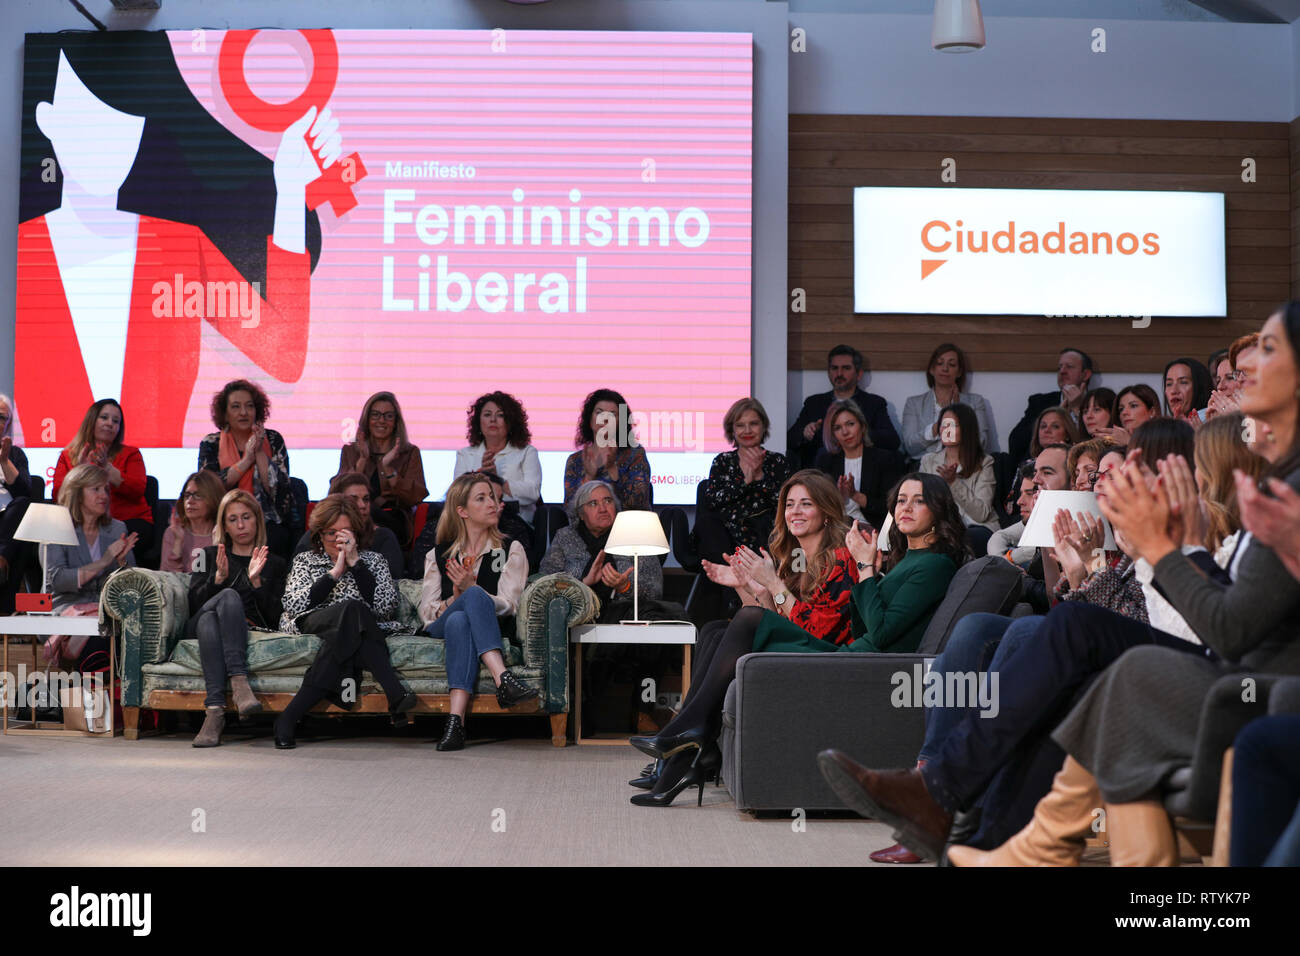 Madrid, Spain. 03rd March, 2019. The president of Ciudadanos (Cs), Albert Rivera, and the leader of Cs in Catalonia and national party spokesman, Inés Arrimadas, present the decalogue of Cs 'Liberal Feminism', an inclusive, plural and open feminism. Credit: Jesús Hellin/Alamy Live News Stock Photo